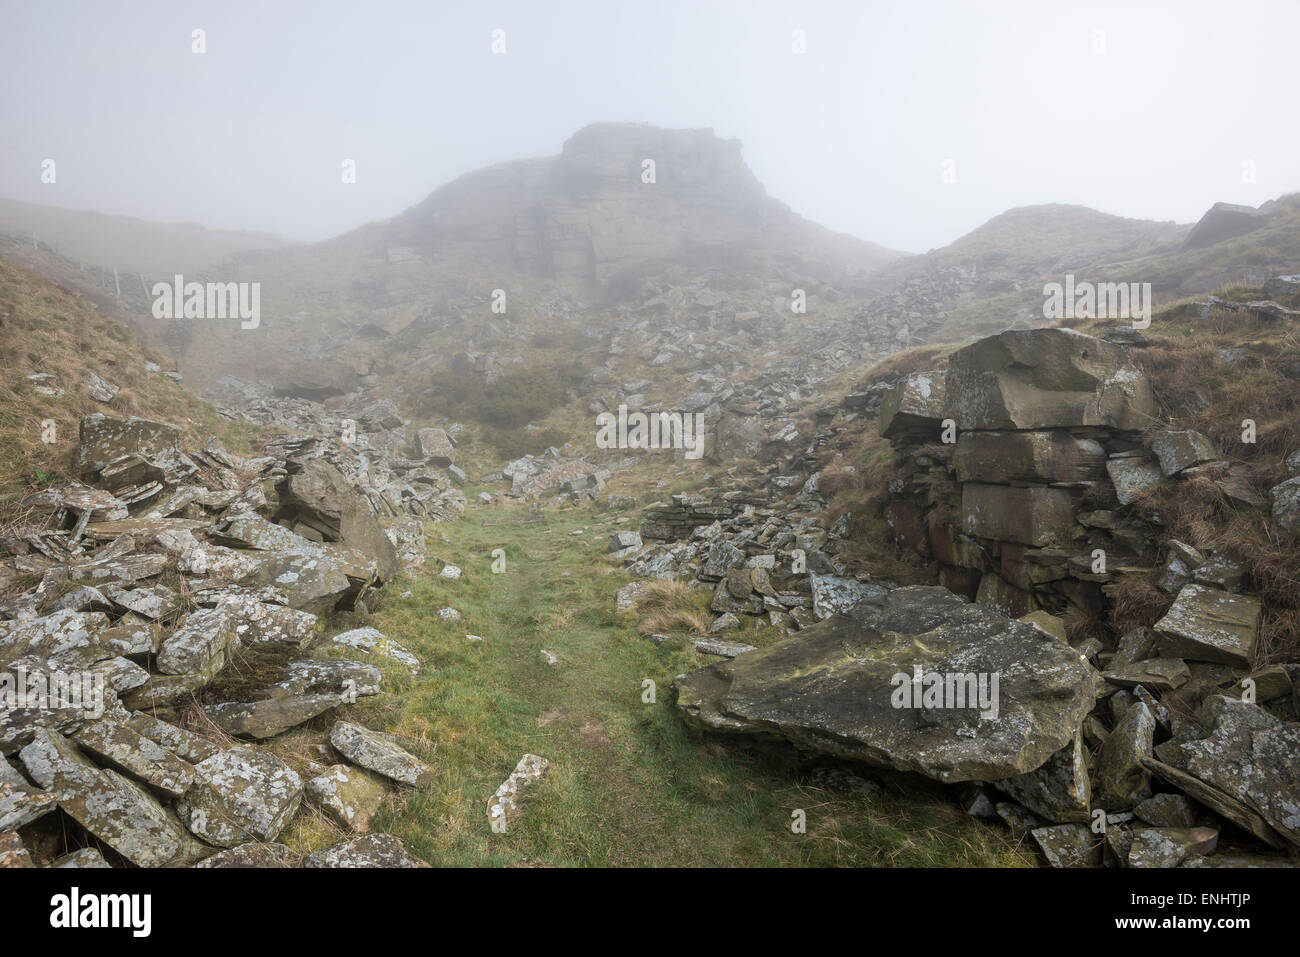 Remains of a disused quarry on Cracken edge near Chinley in Derbyshire. A foggy spring morning. Stock Photo